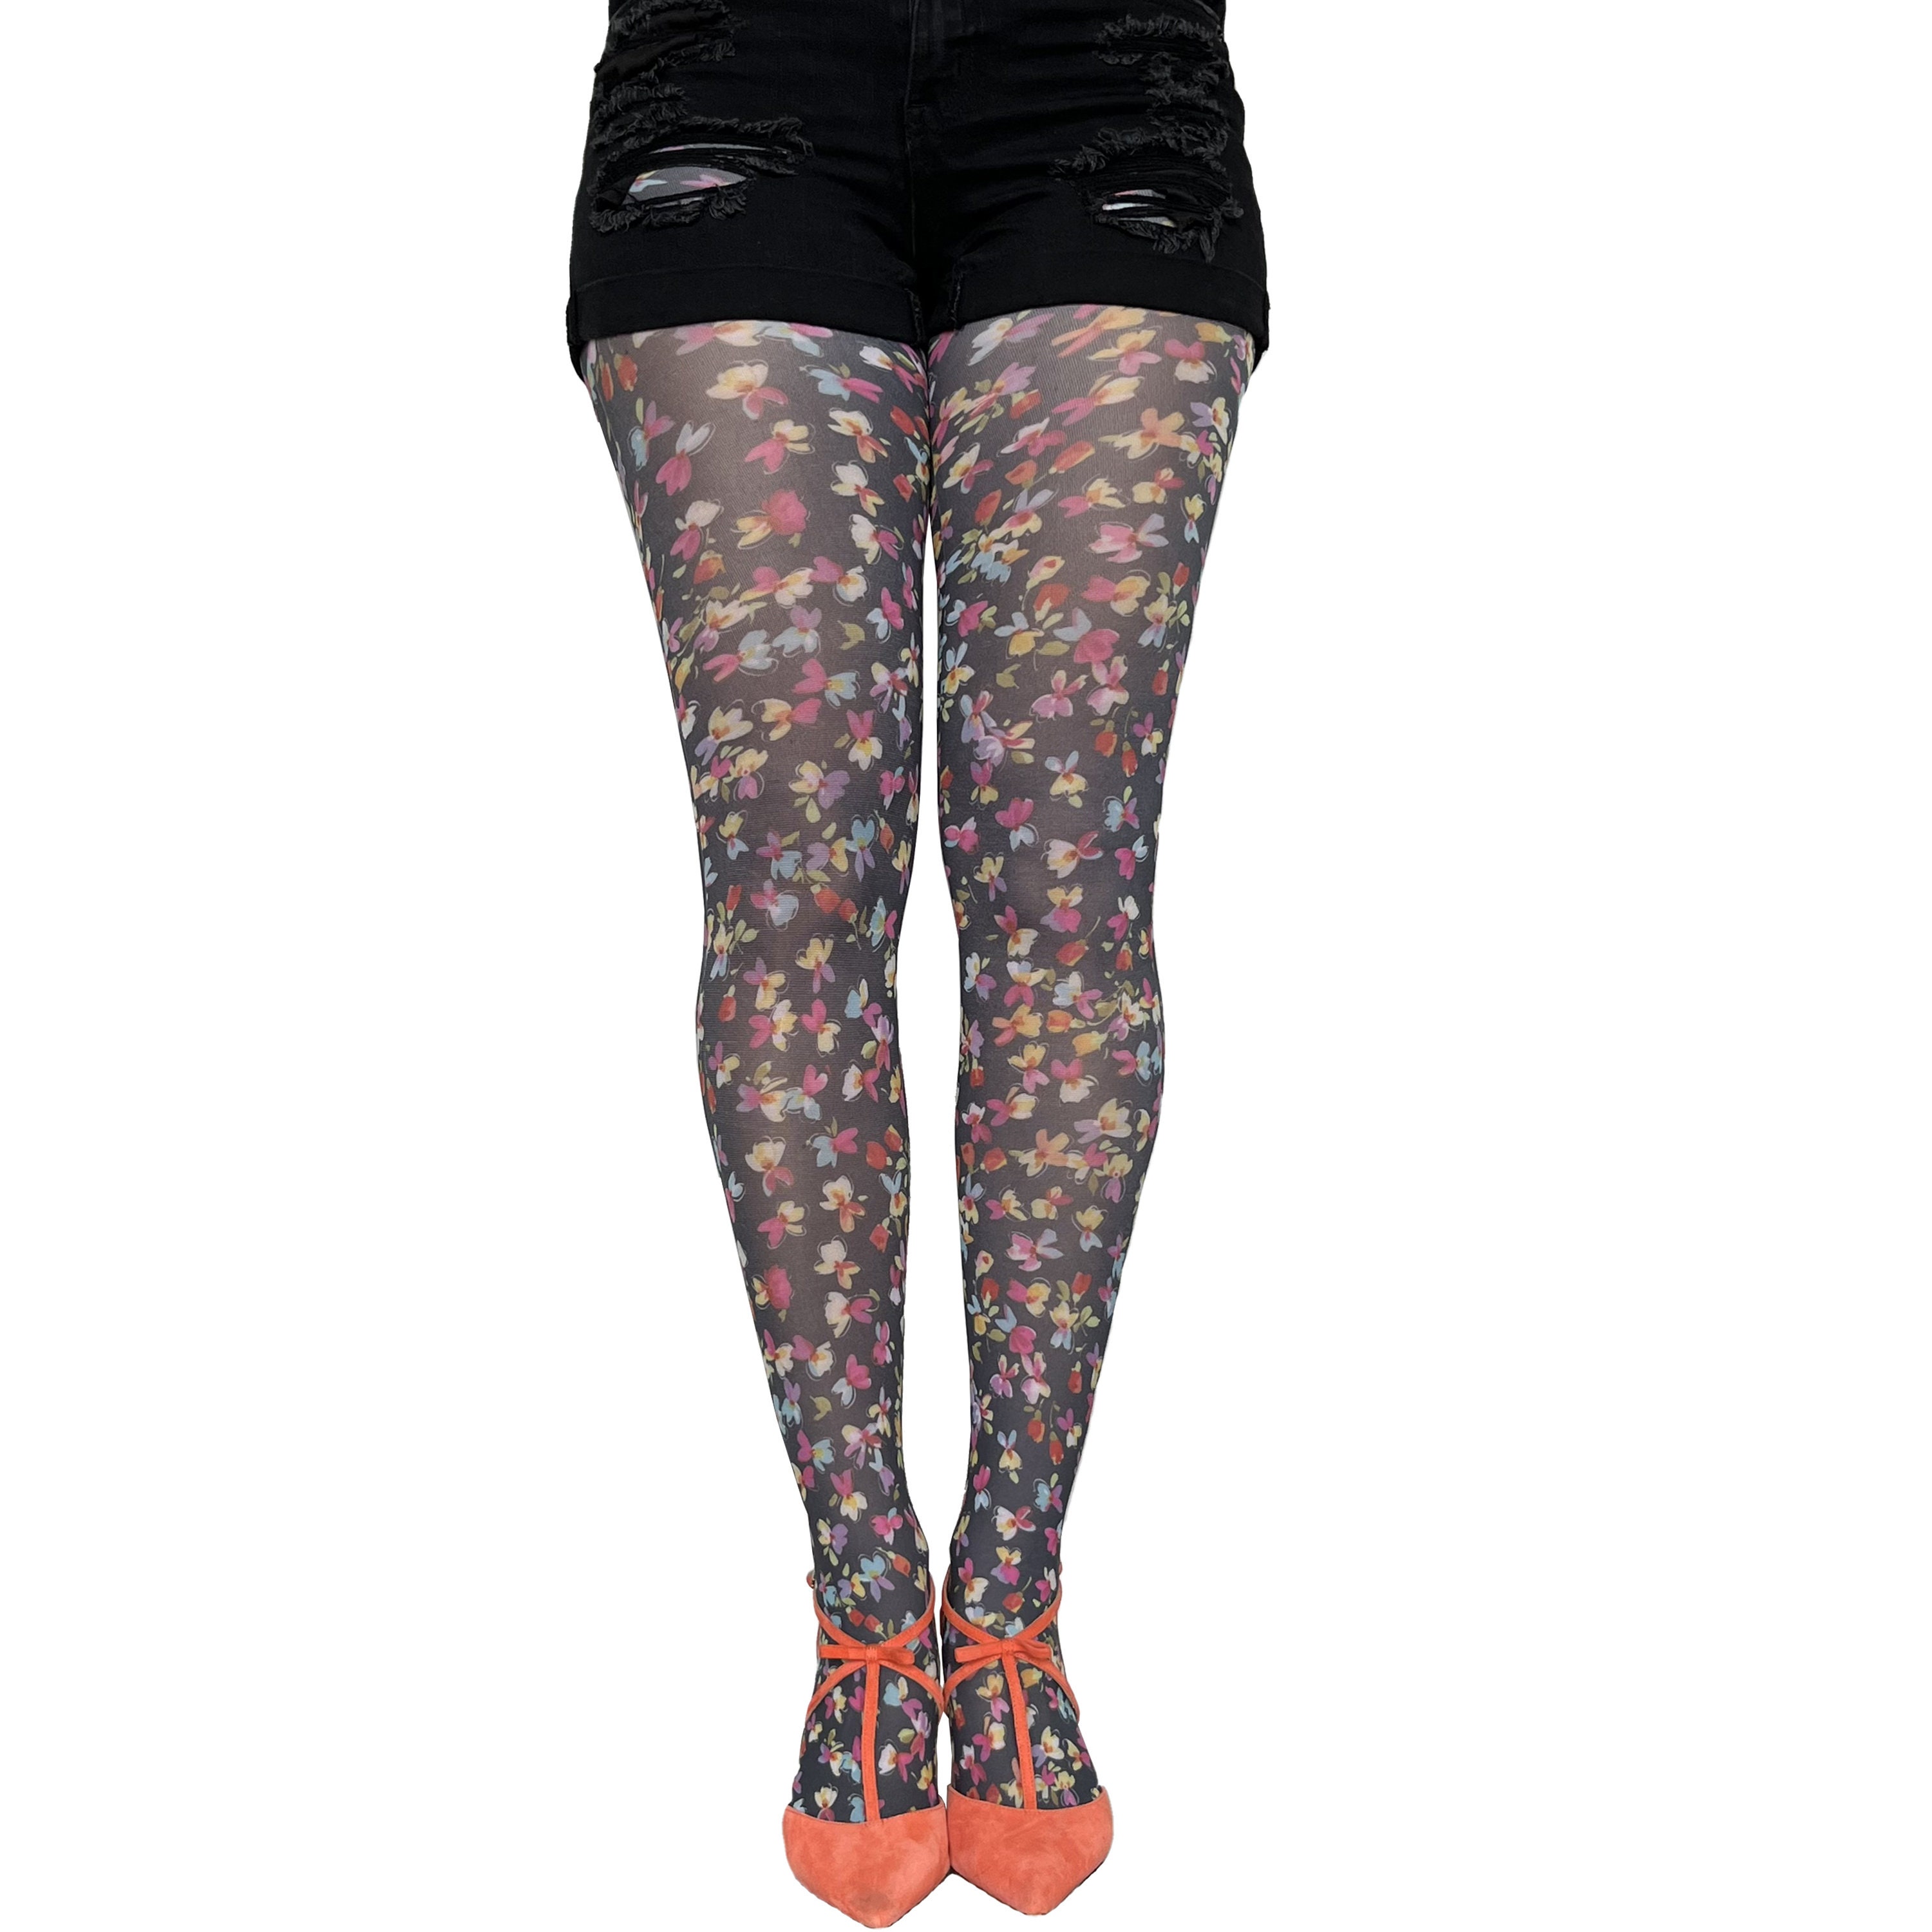 Black Small Flowers Patterned Tights for Women Gift for Her. -  Canada